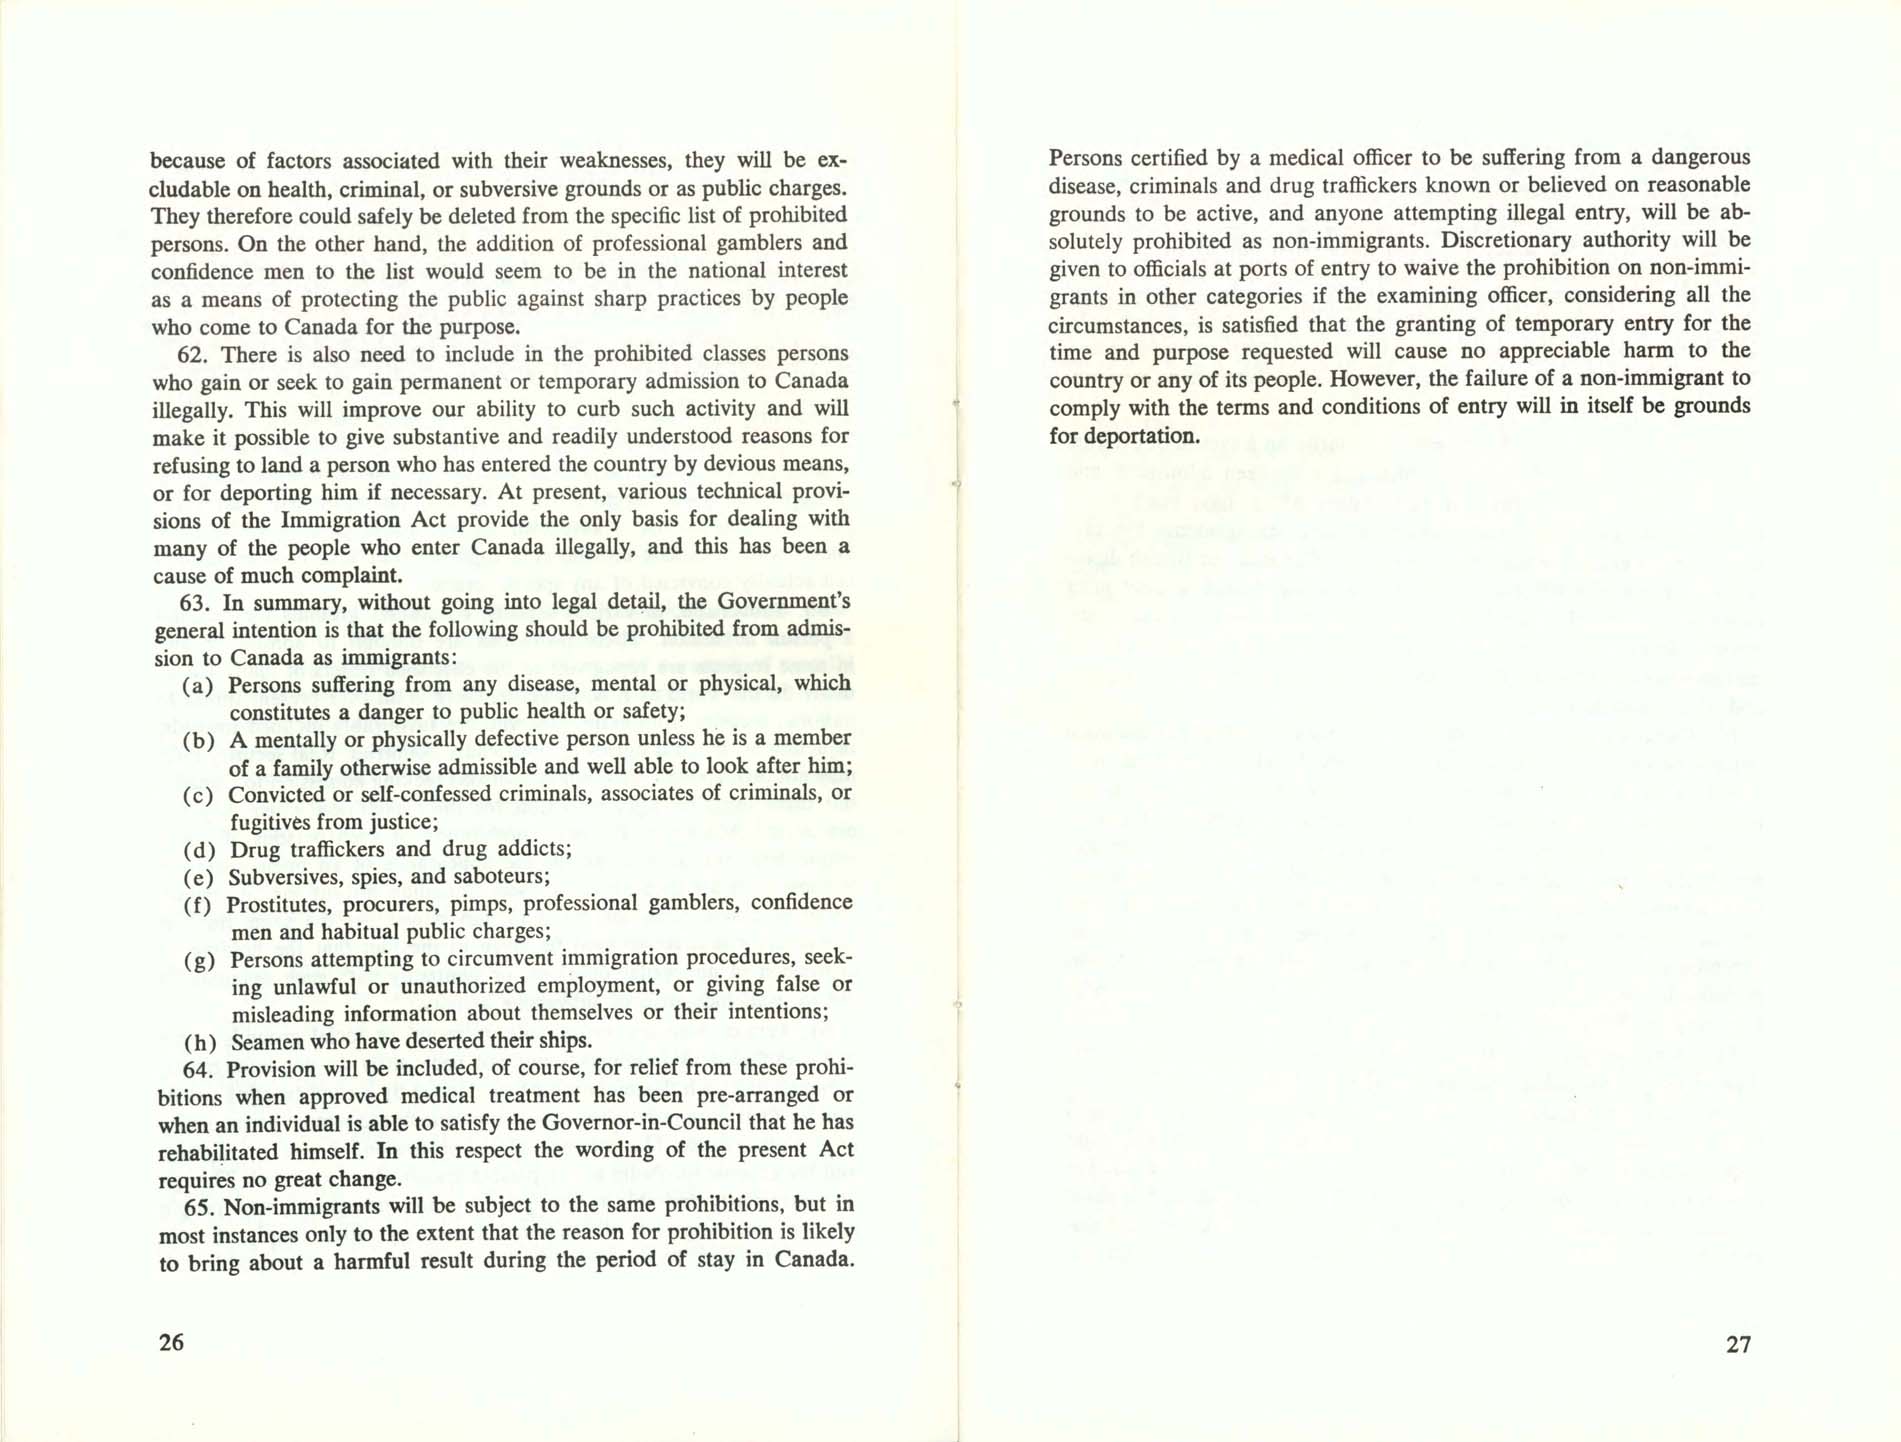 Page 26, 27 White Paper on Immigration, 1966